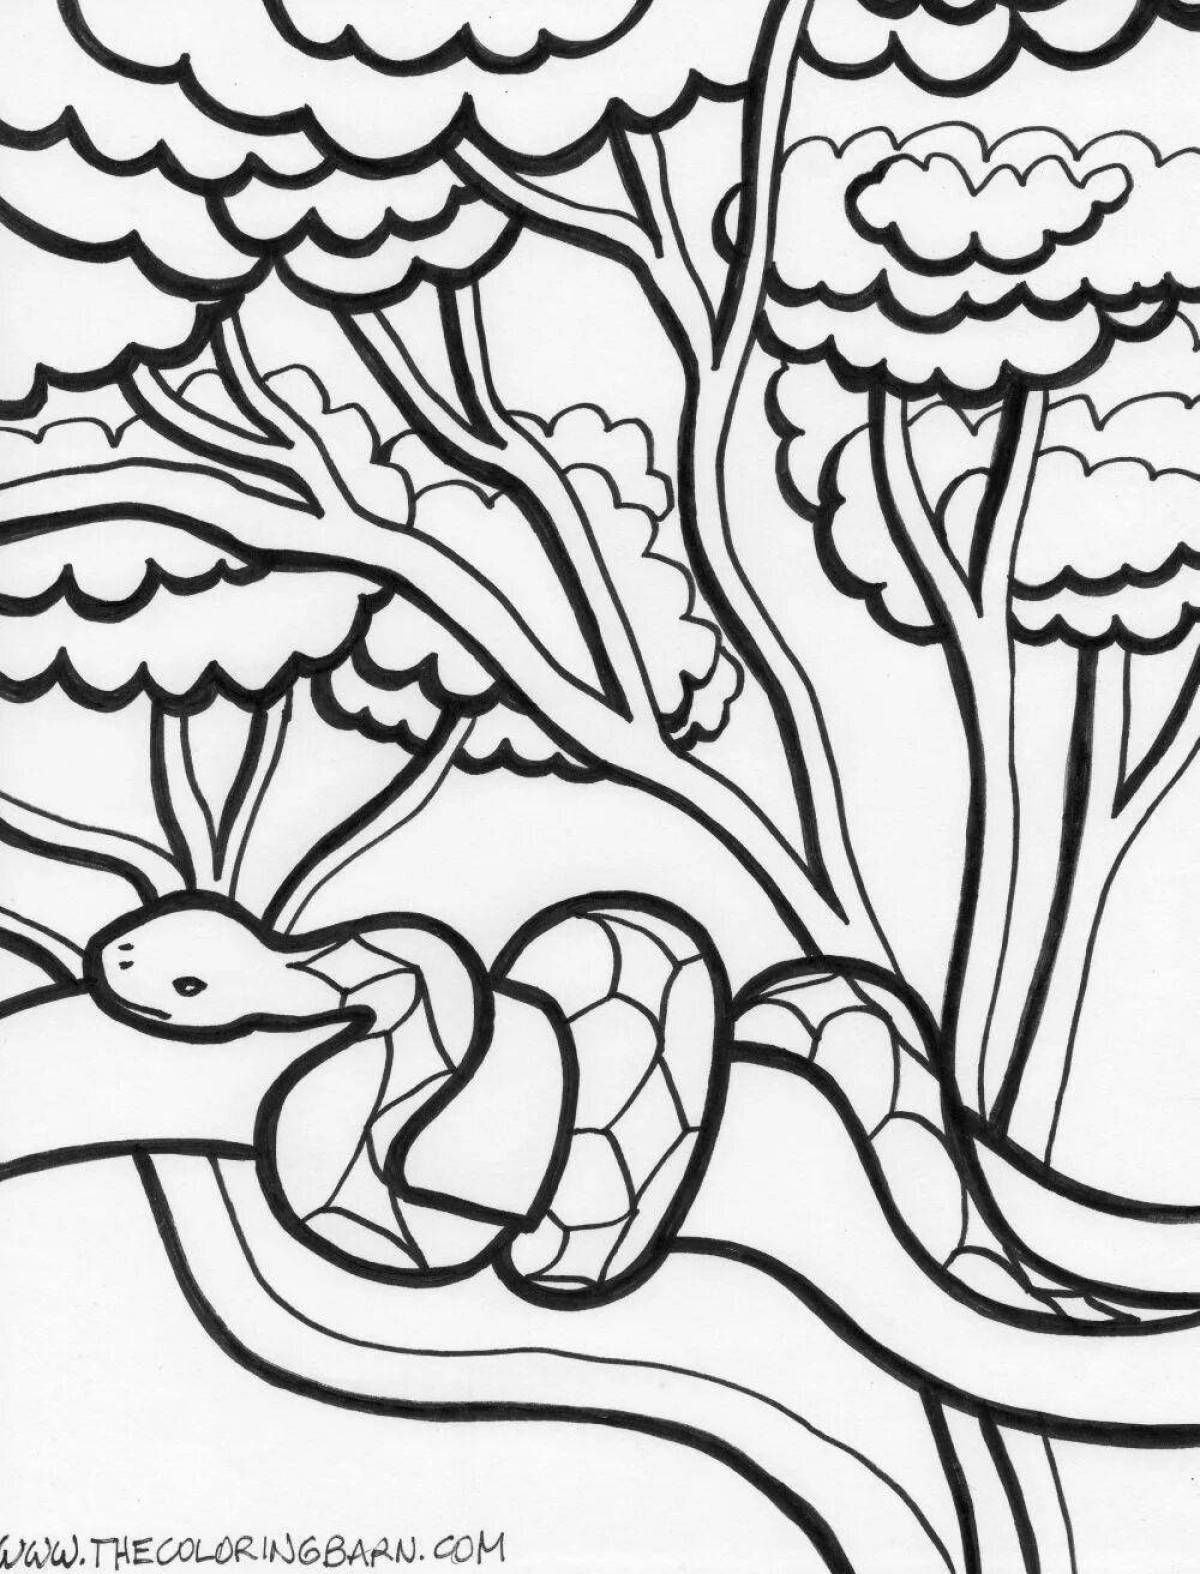 Colorful rainforest coloring page